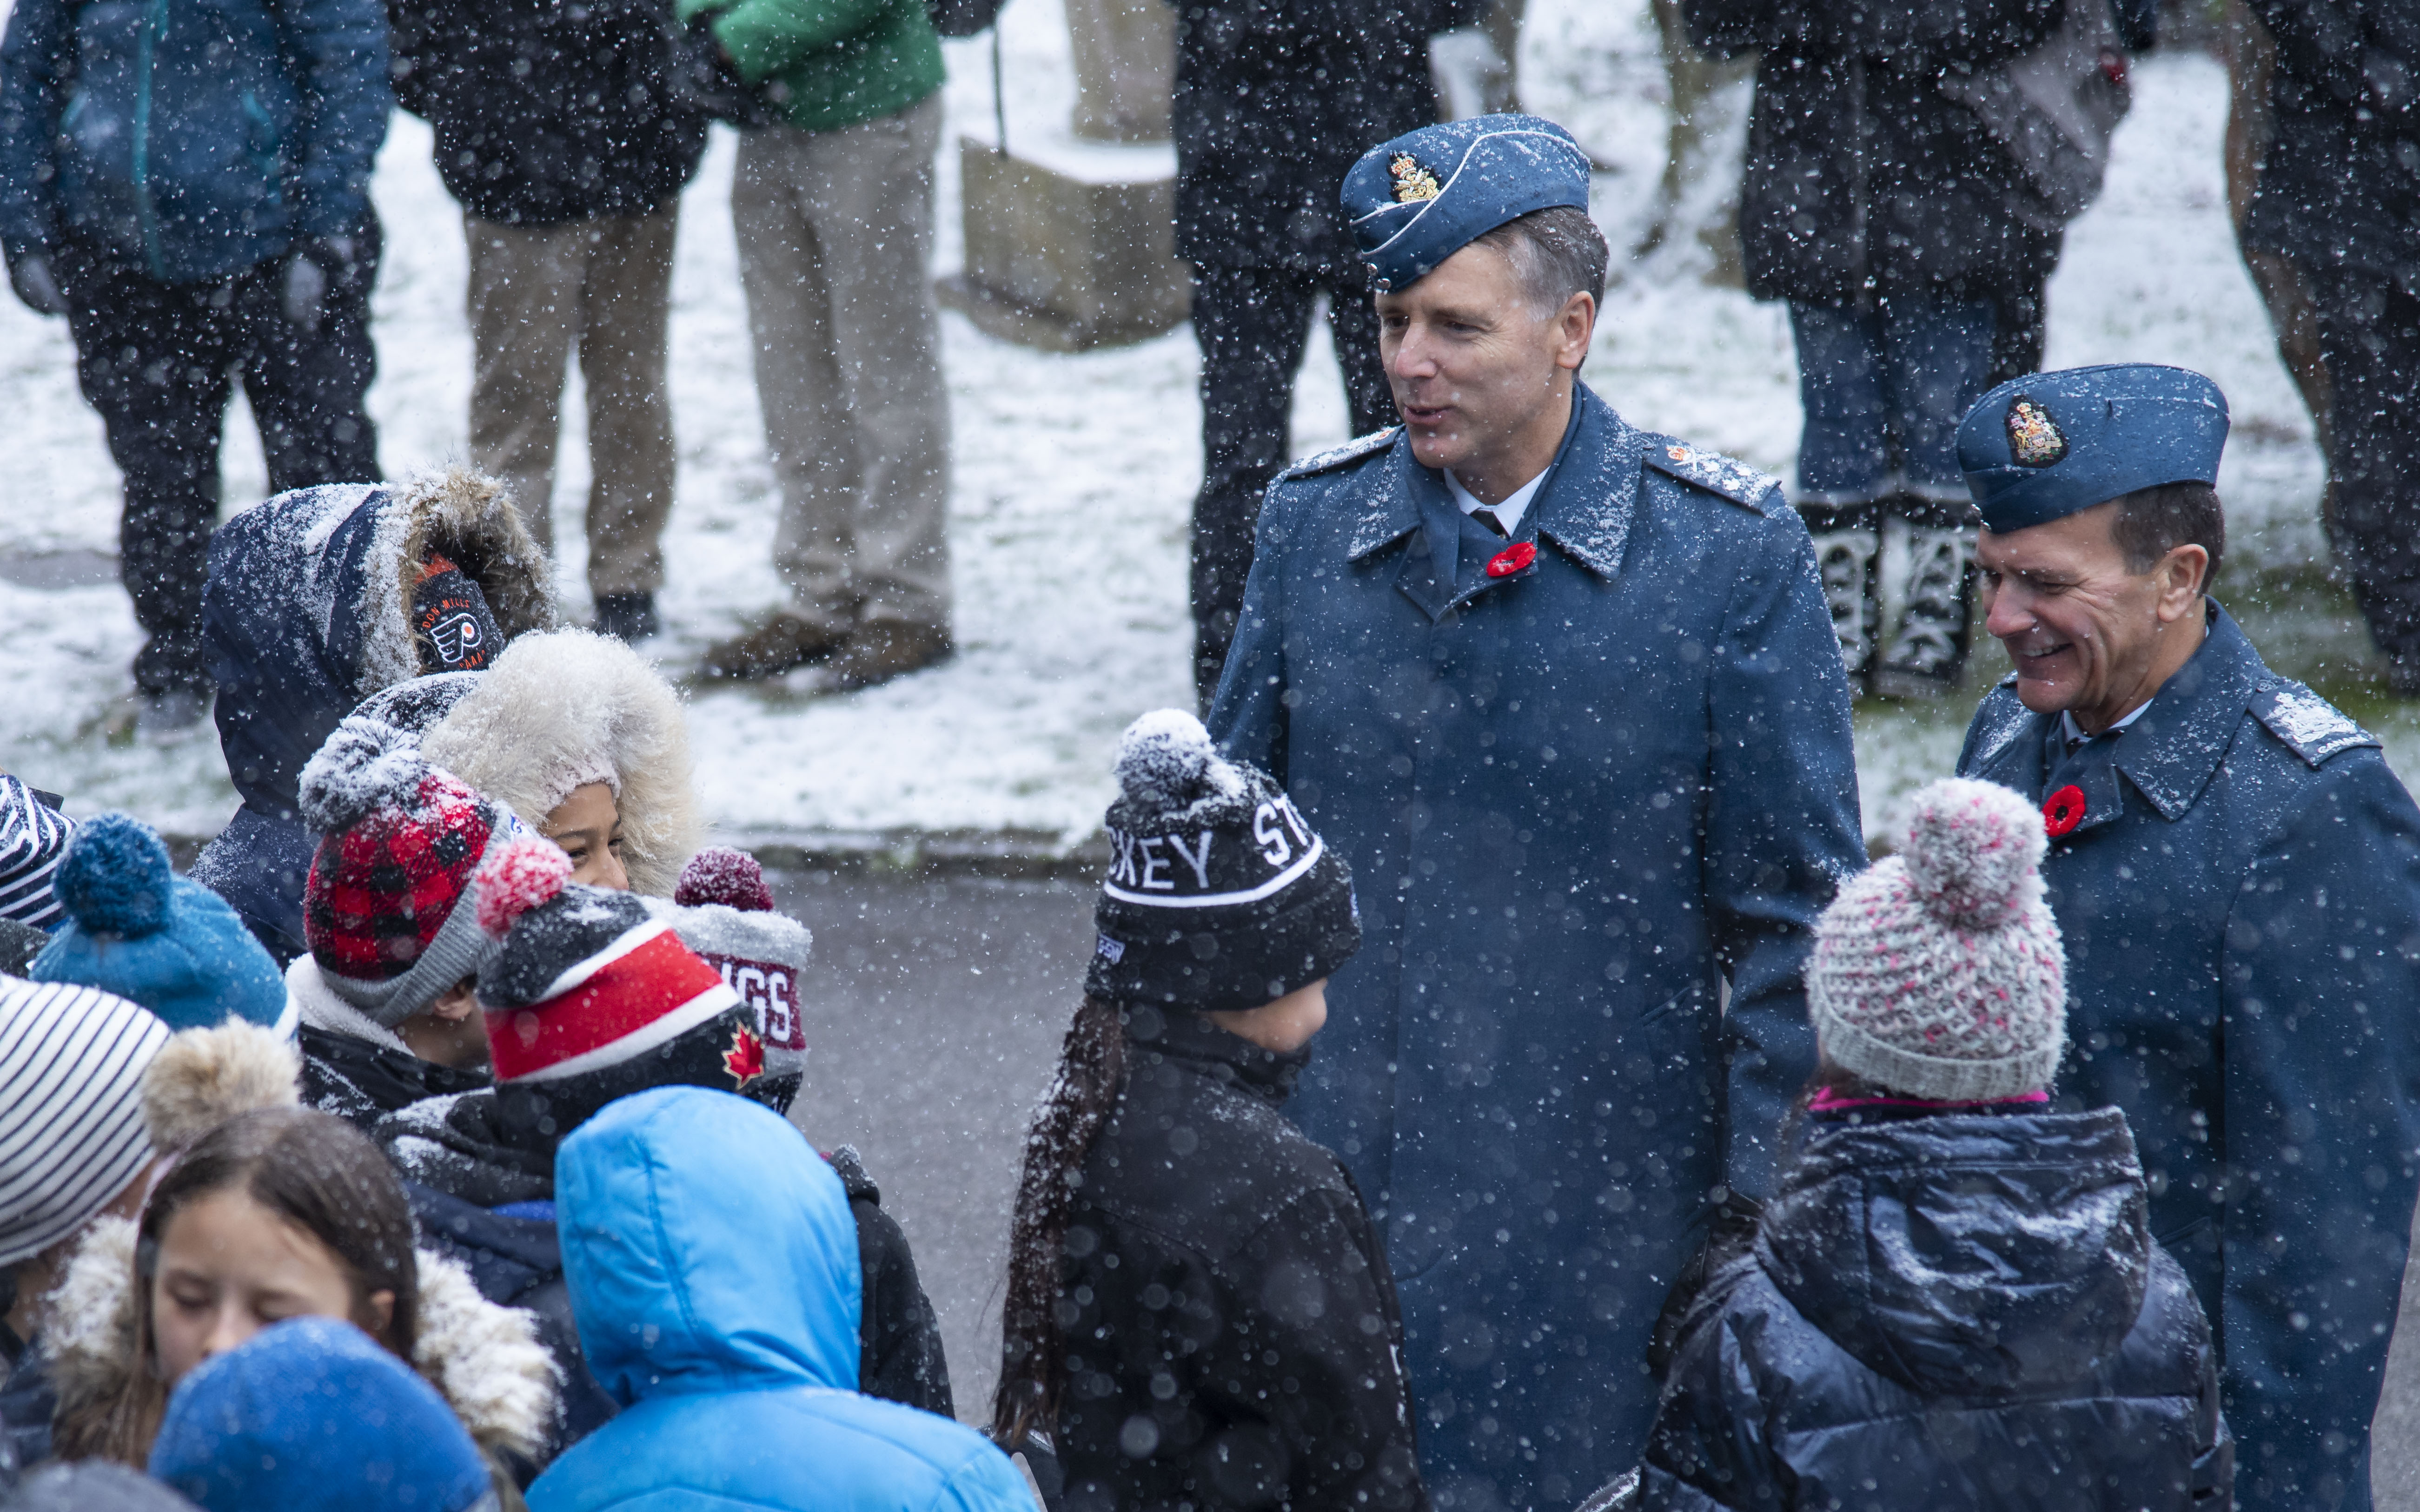 Lieutenant-General Al Meinzinger (left), commander of the Royal Canadian Air Force, and Chief Warrant Officer Denis Gaudreault, command chief warrant officer of the RCAF, talk with students before a Remembrance Day ceremony on November 11, 2019, held at the Mount Pleasant Cemetery, Toronto, Ontario. PHOTO: Corporal Lynette Ai Dang, BM10-2019-0359-005